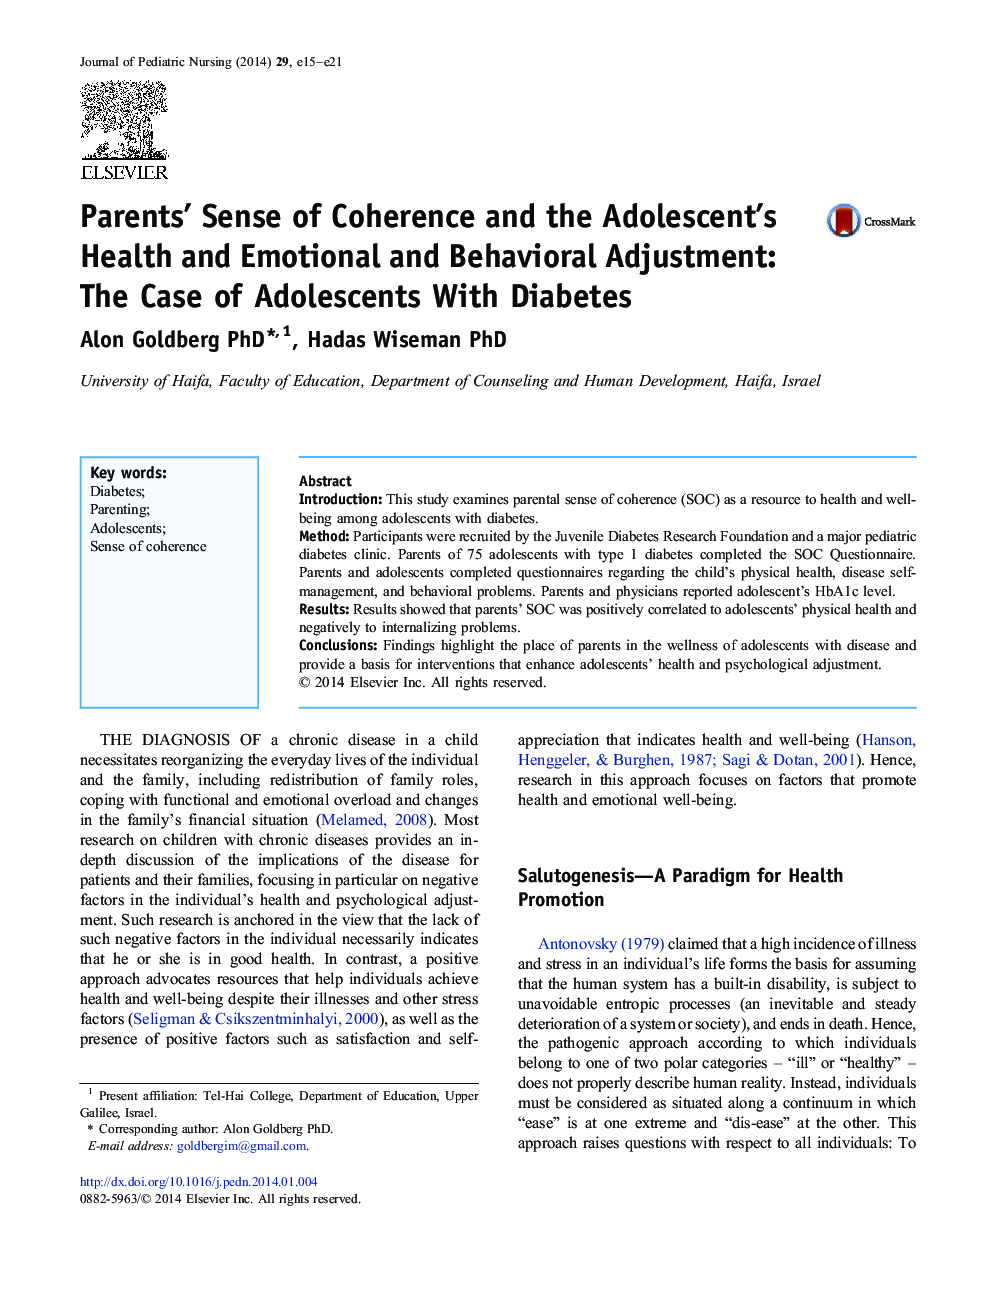 Parents’ Sense of Coherence and the Adolescent’s Health and Emotional and Behavioral Adjustment: The Case of Adolescents With Diabetes